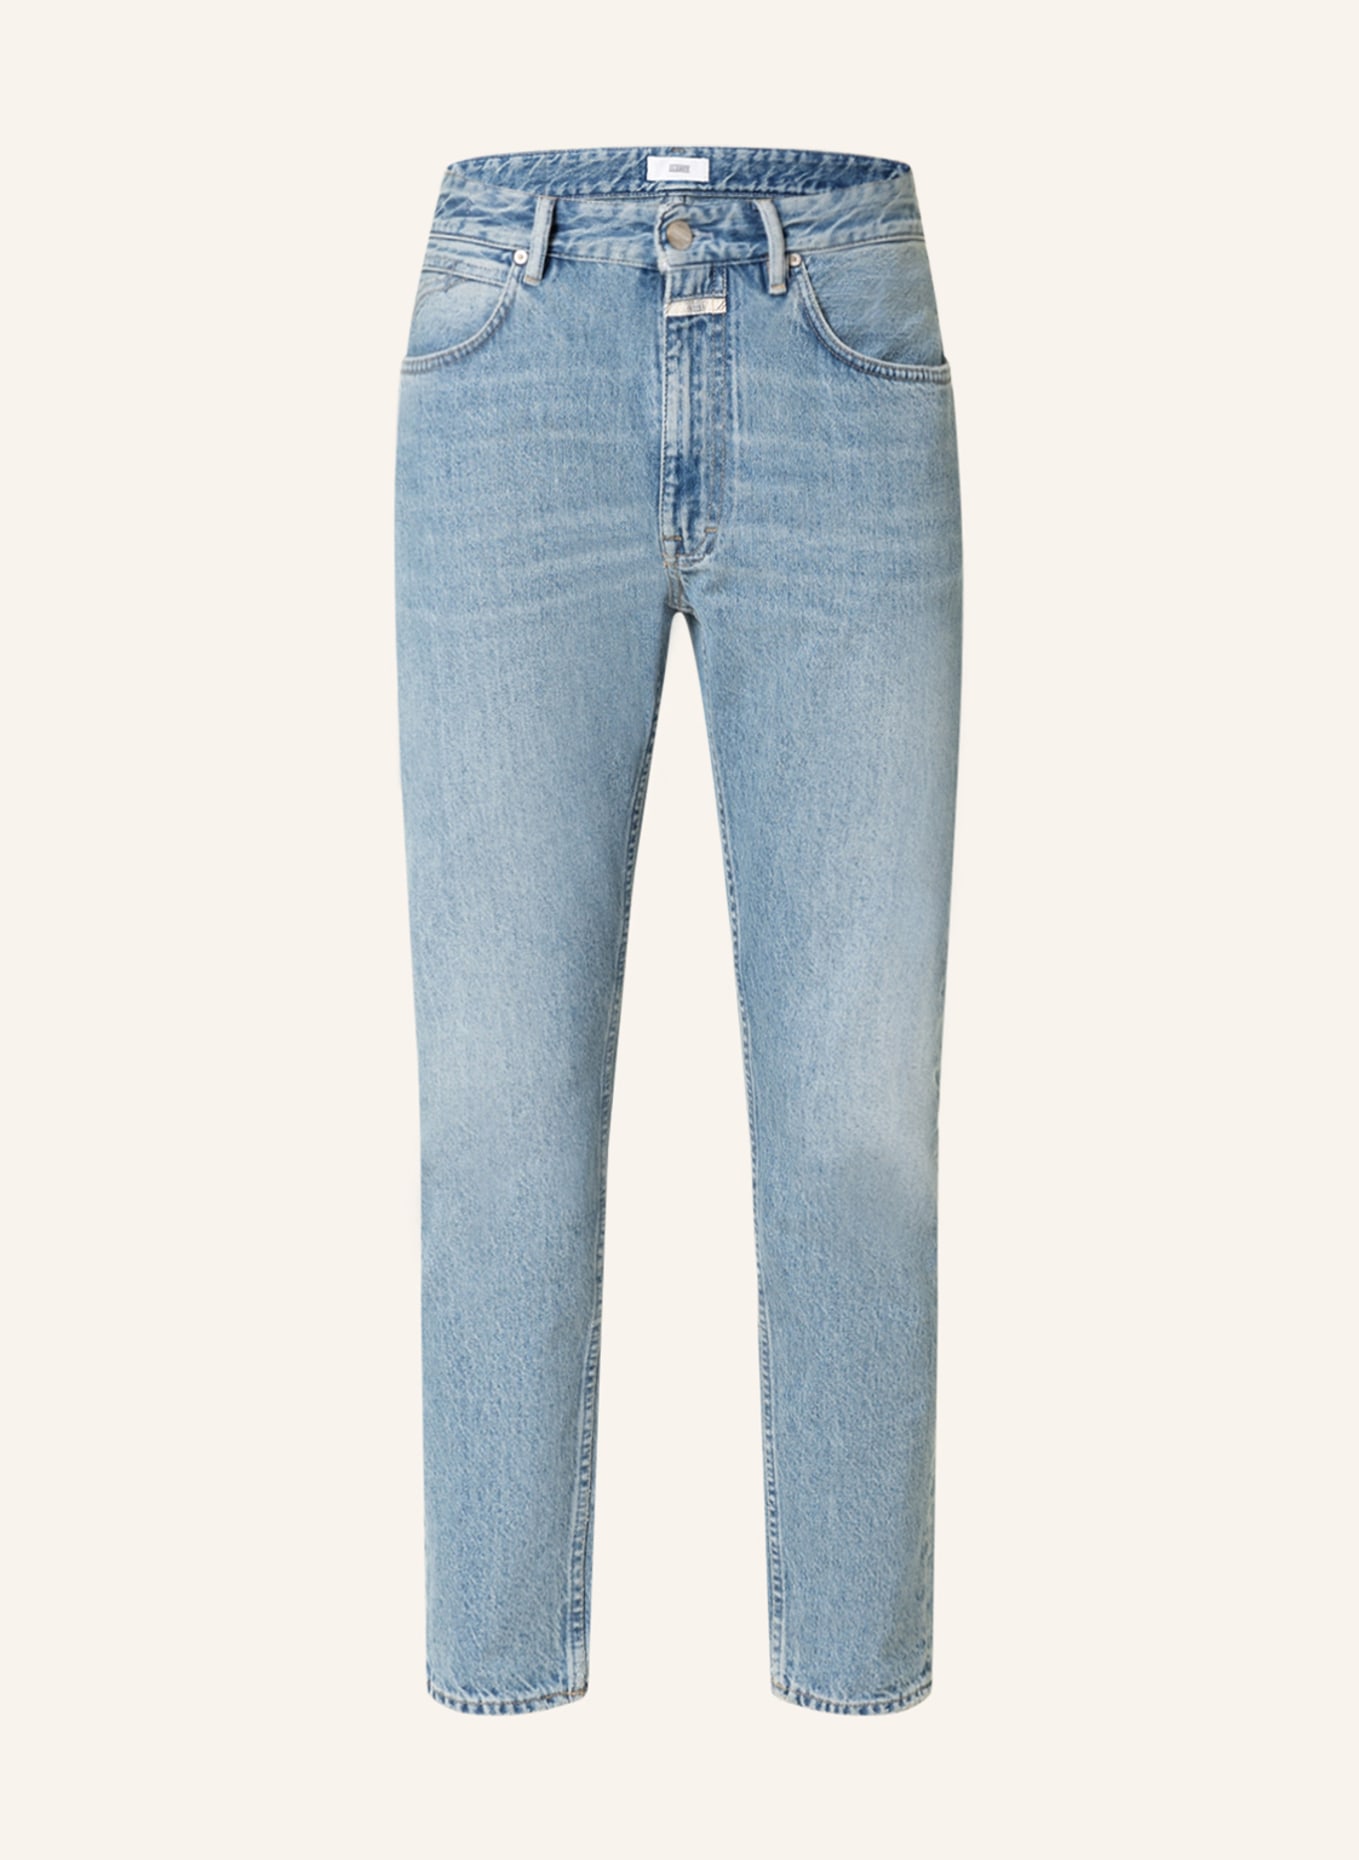 CLOSED Jeans COOPER tapered fit in light blue Breuninger